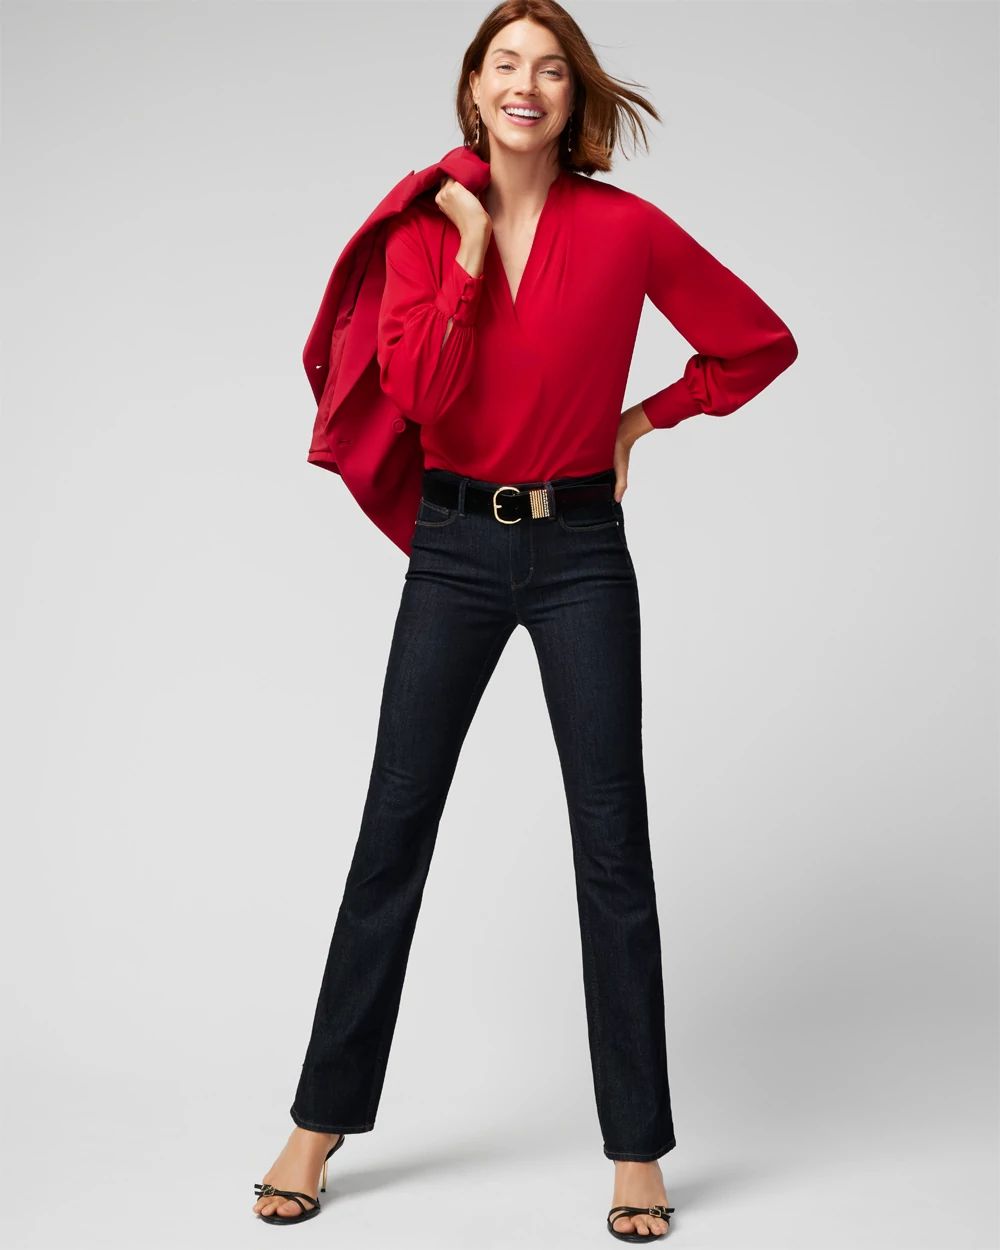 Long Sleeve Pleat V-Neck Blouse click to view larger image.